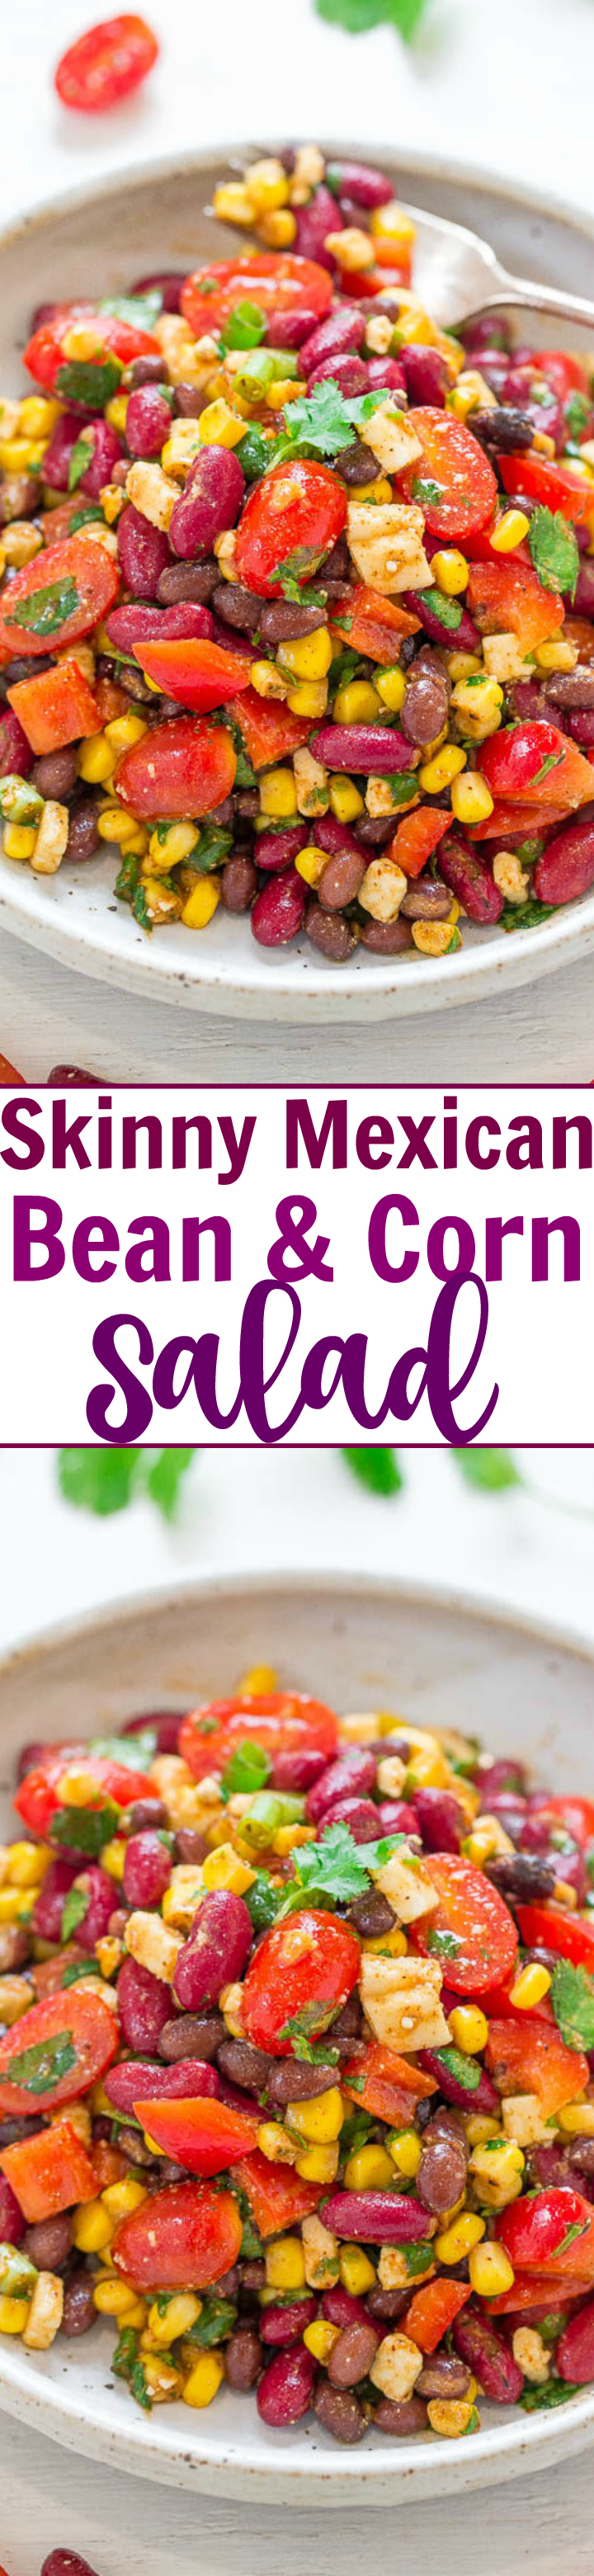 Mexican Bean Salad — Such a fast and easy recipe to make! Plus, it's loaded with flavor and textures galore. Two kinds of beans, juicy corn and tomatoes, crisp peppers, and green onions are tossed in a lime-chili-cumin vinaigrette that's perfectly light!! 